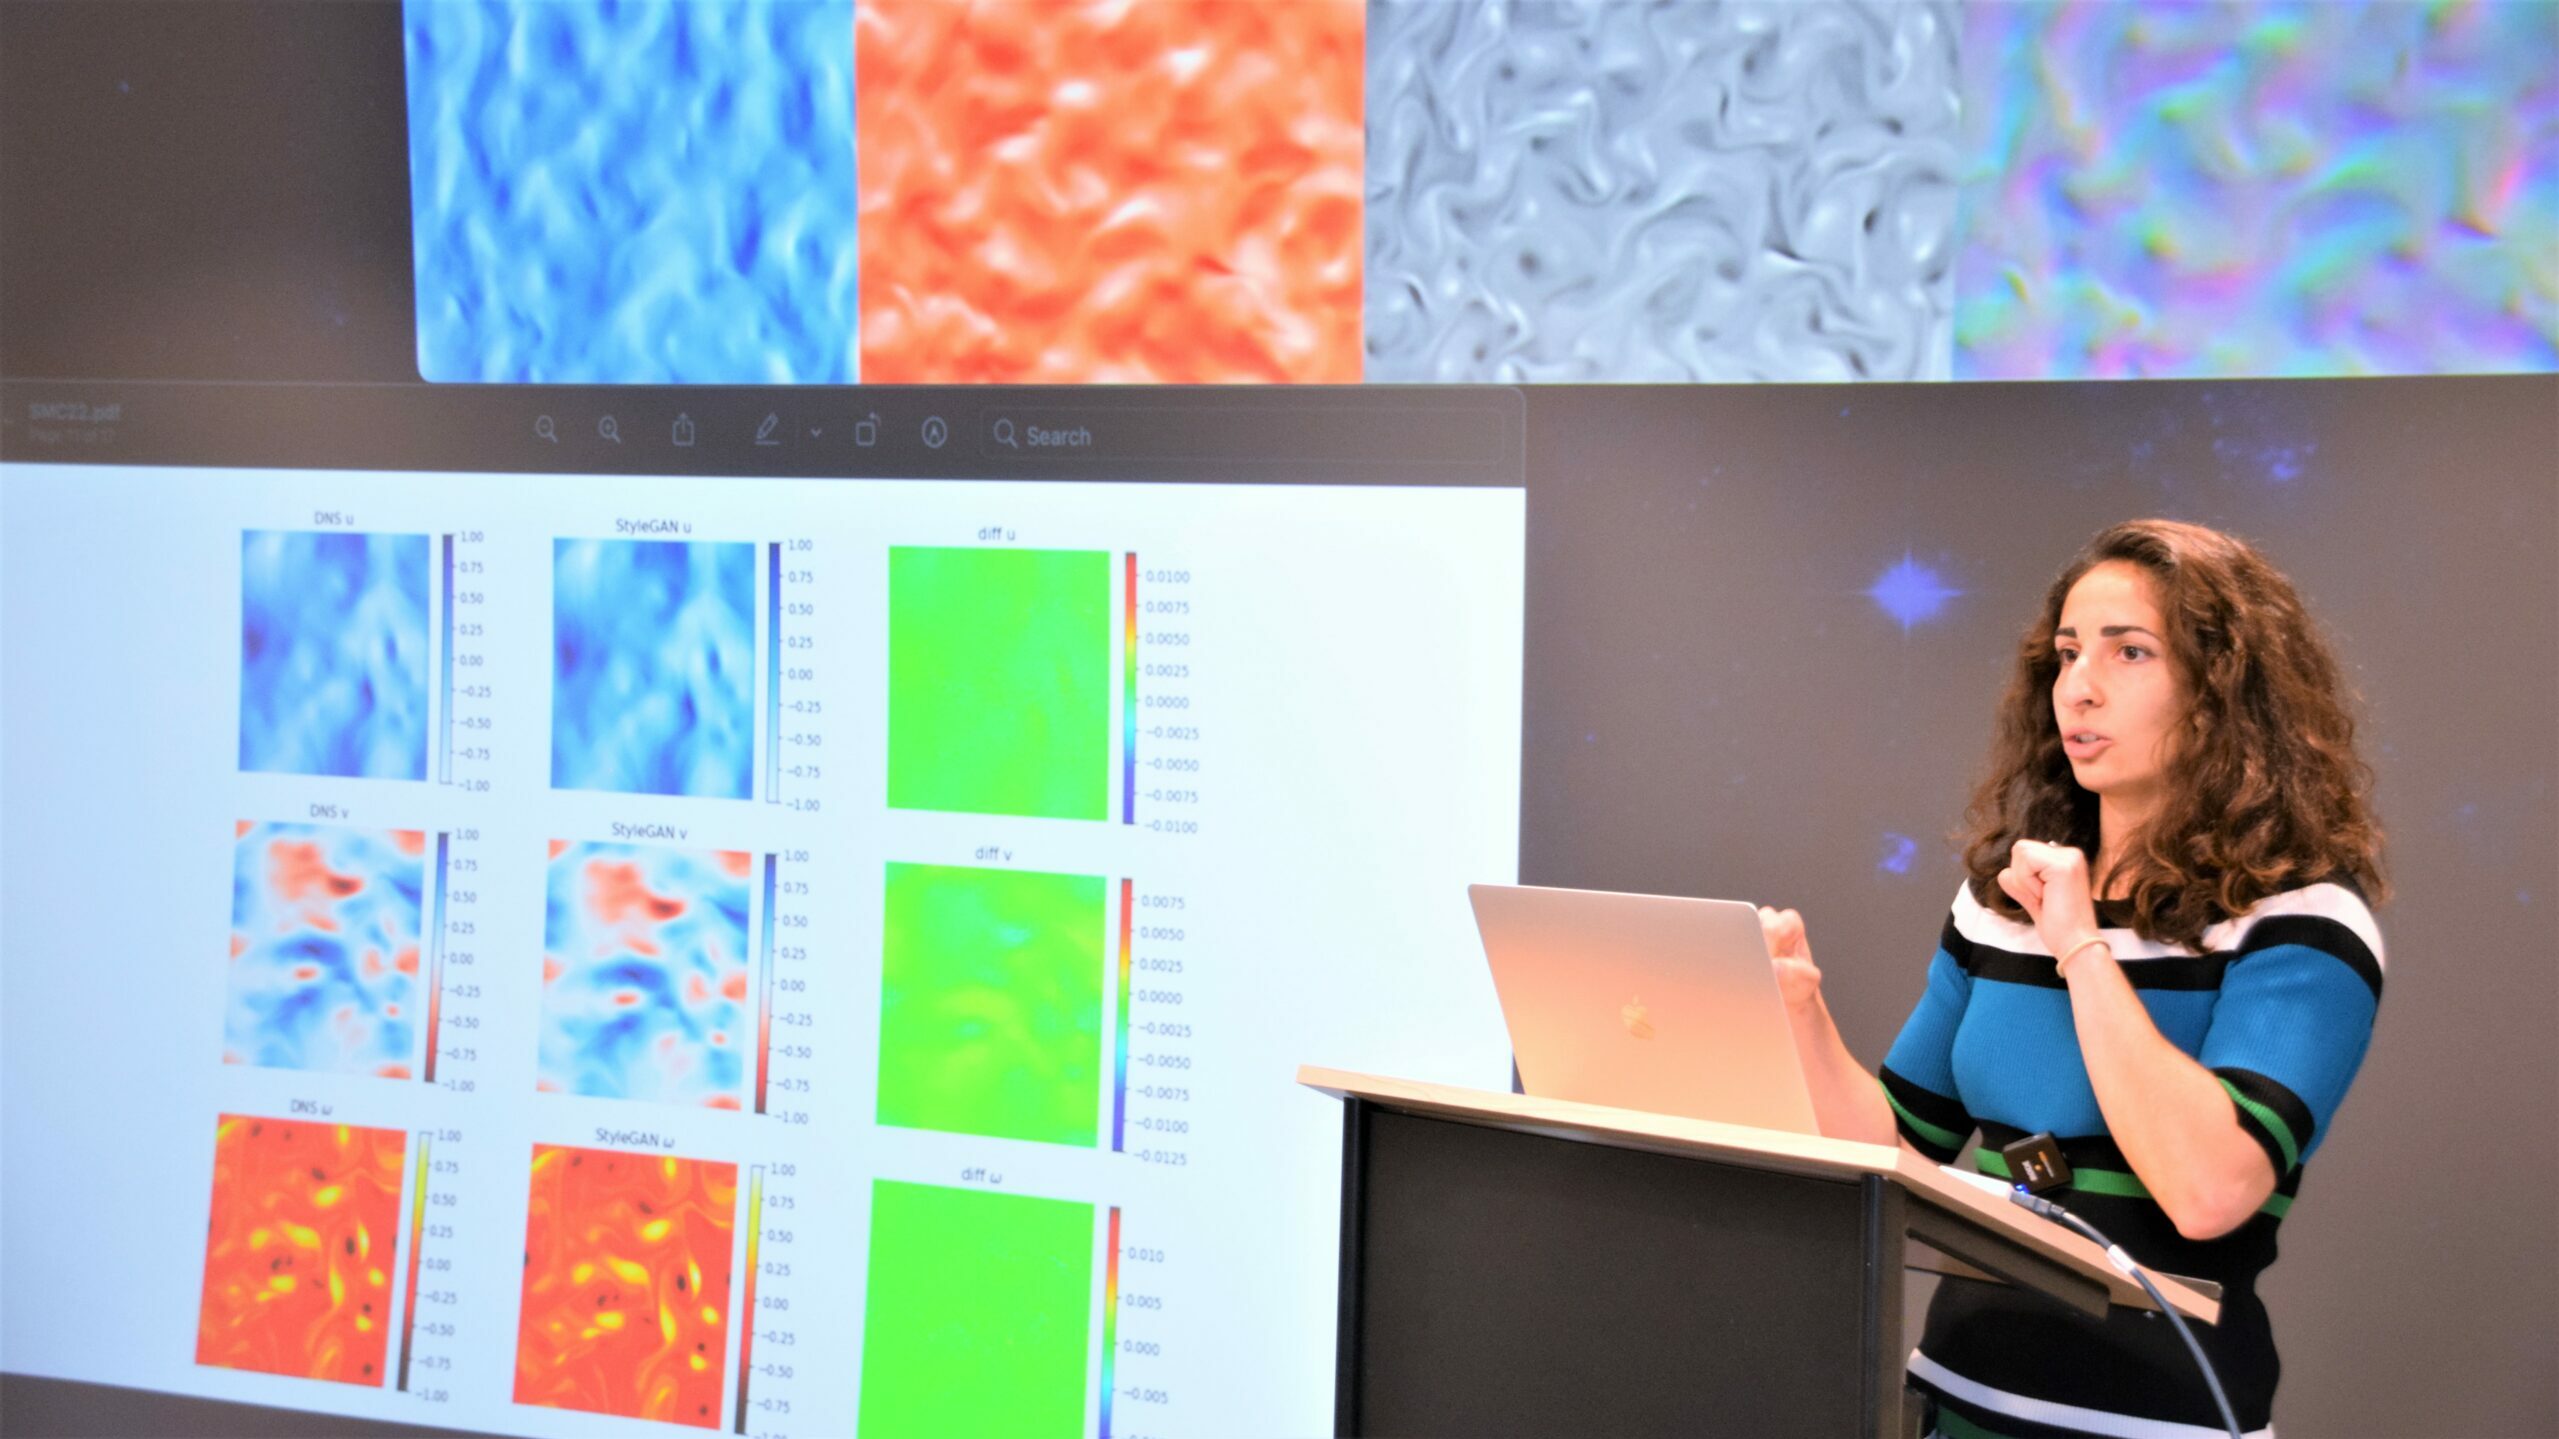 Woman with brown hair standing at lecturn in front of large screen depicting colourful graphs